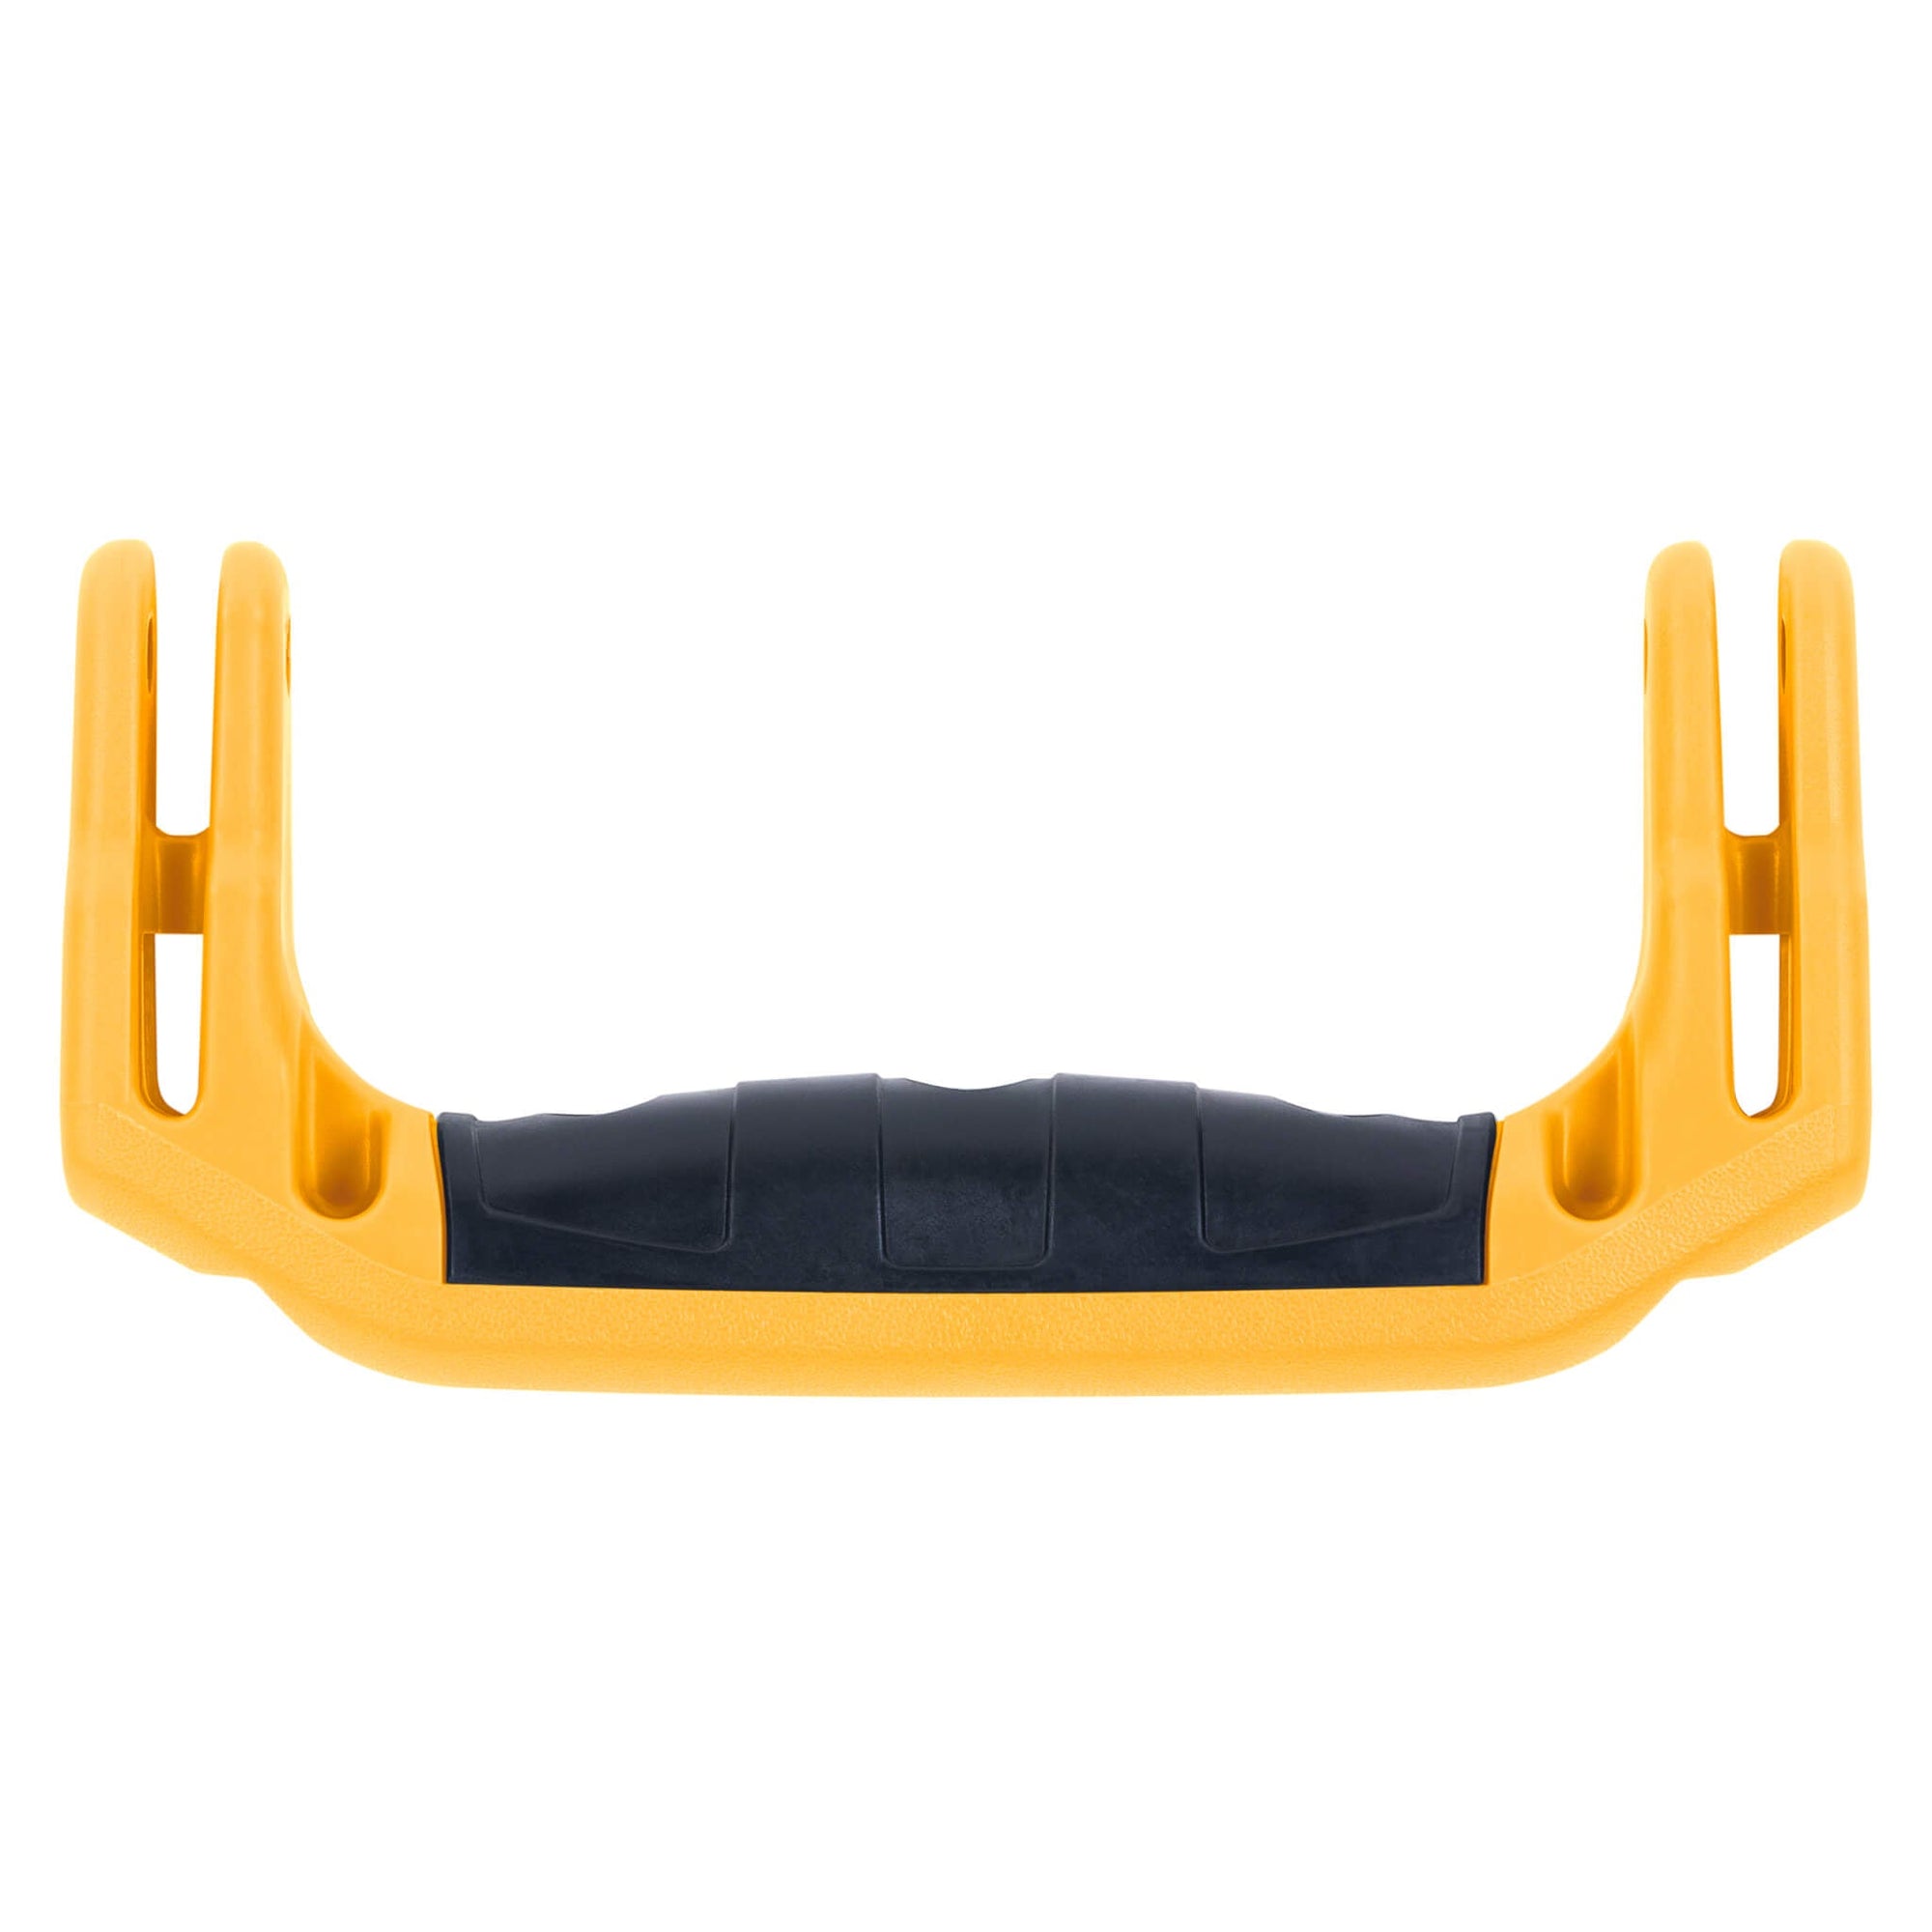 Pelican Rubber Overmolded Replacement Handle, Small, Yellow (2-Prong) ColorCase 